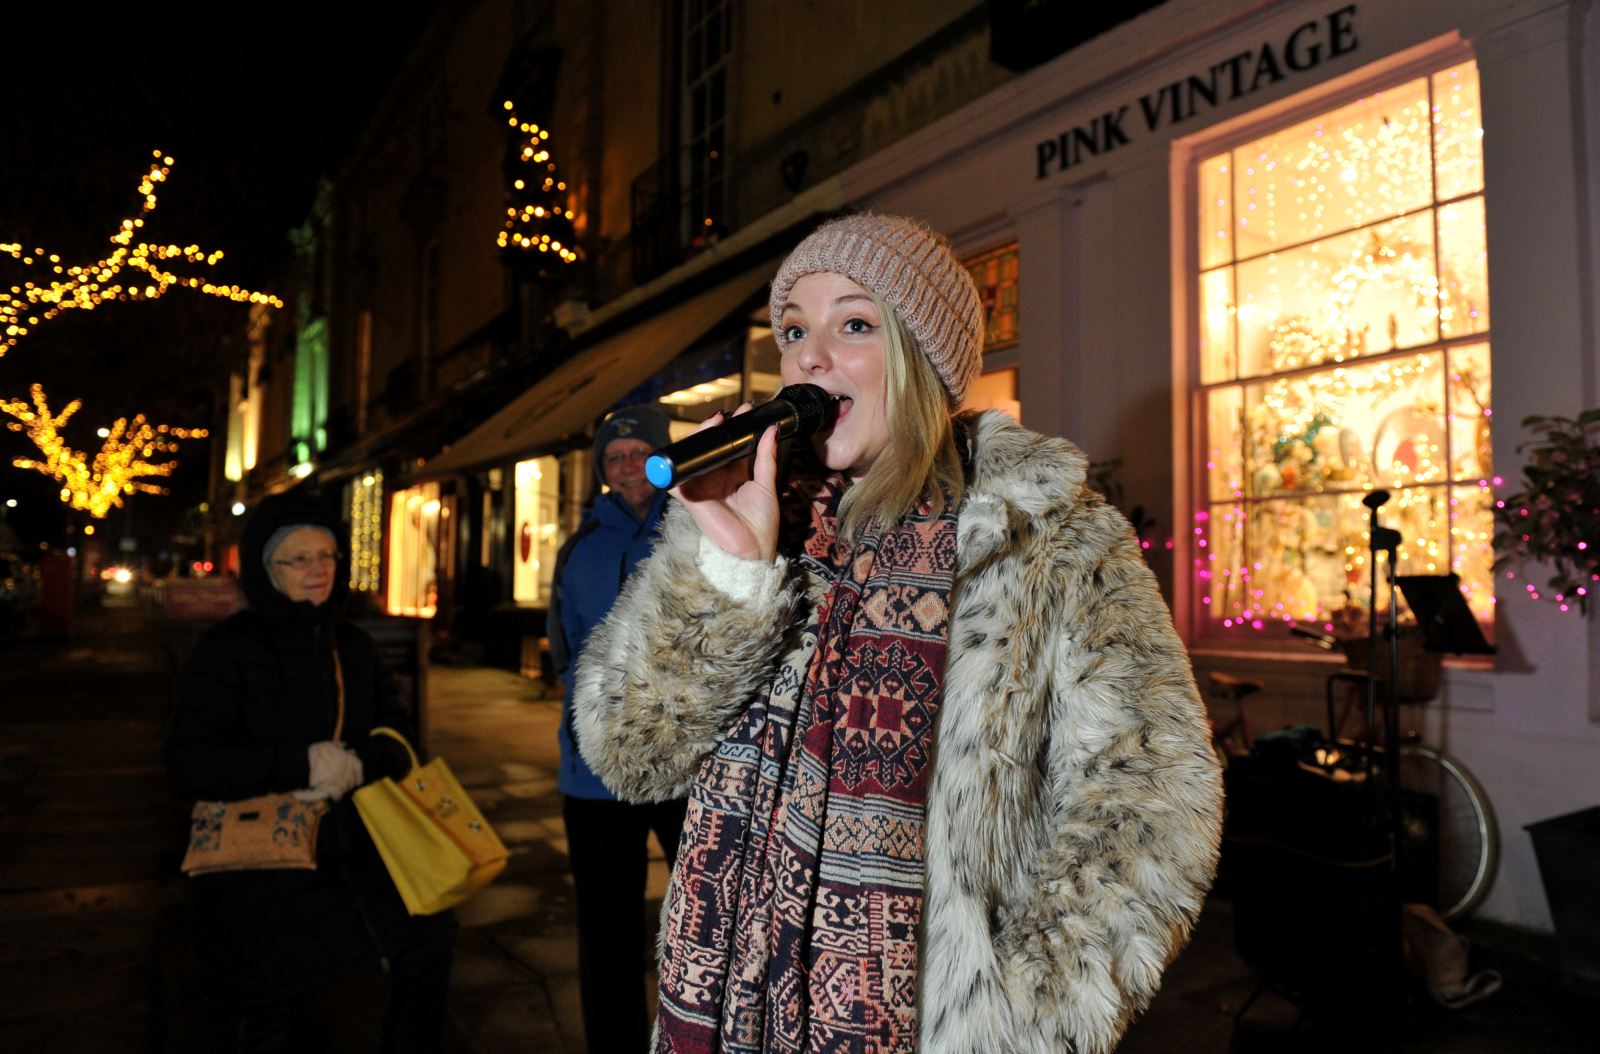 Singer singing into microphone at late night shopping event